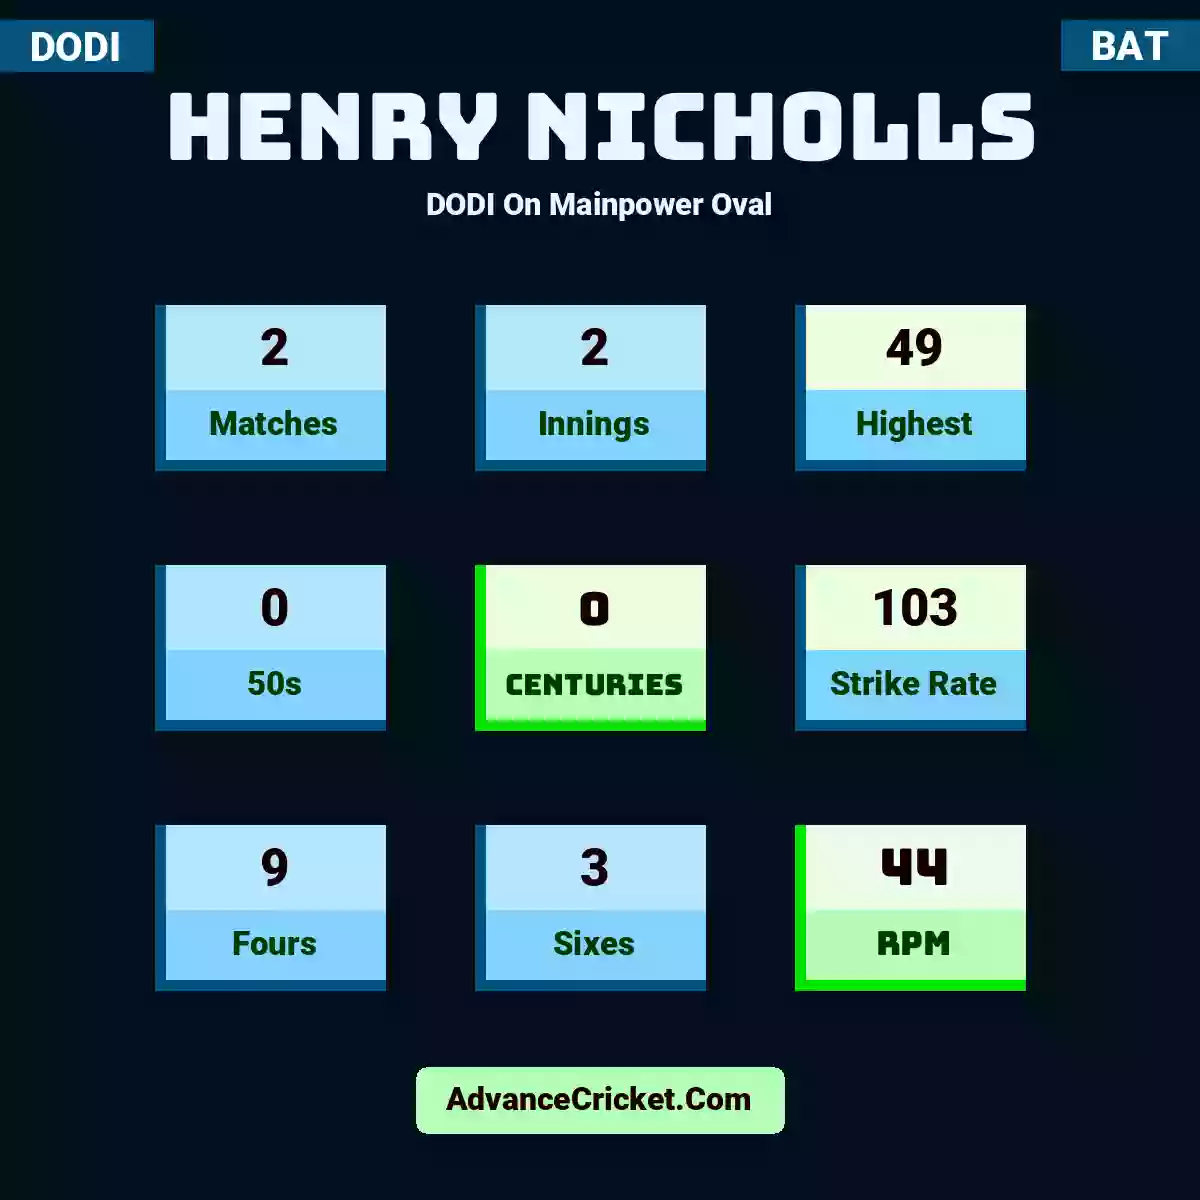 Henry Nicholls DODI  On Mainpower Oval, Henry Nicholls played 2 matches, scored 49 runs as highest, 0 half-centuries, and 0 centuries, with a strike rate of 103. H.Nicholls hit 9 fours and 3 sixes, with an RPM of 44.